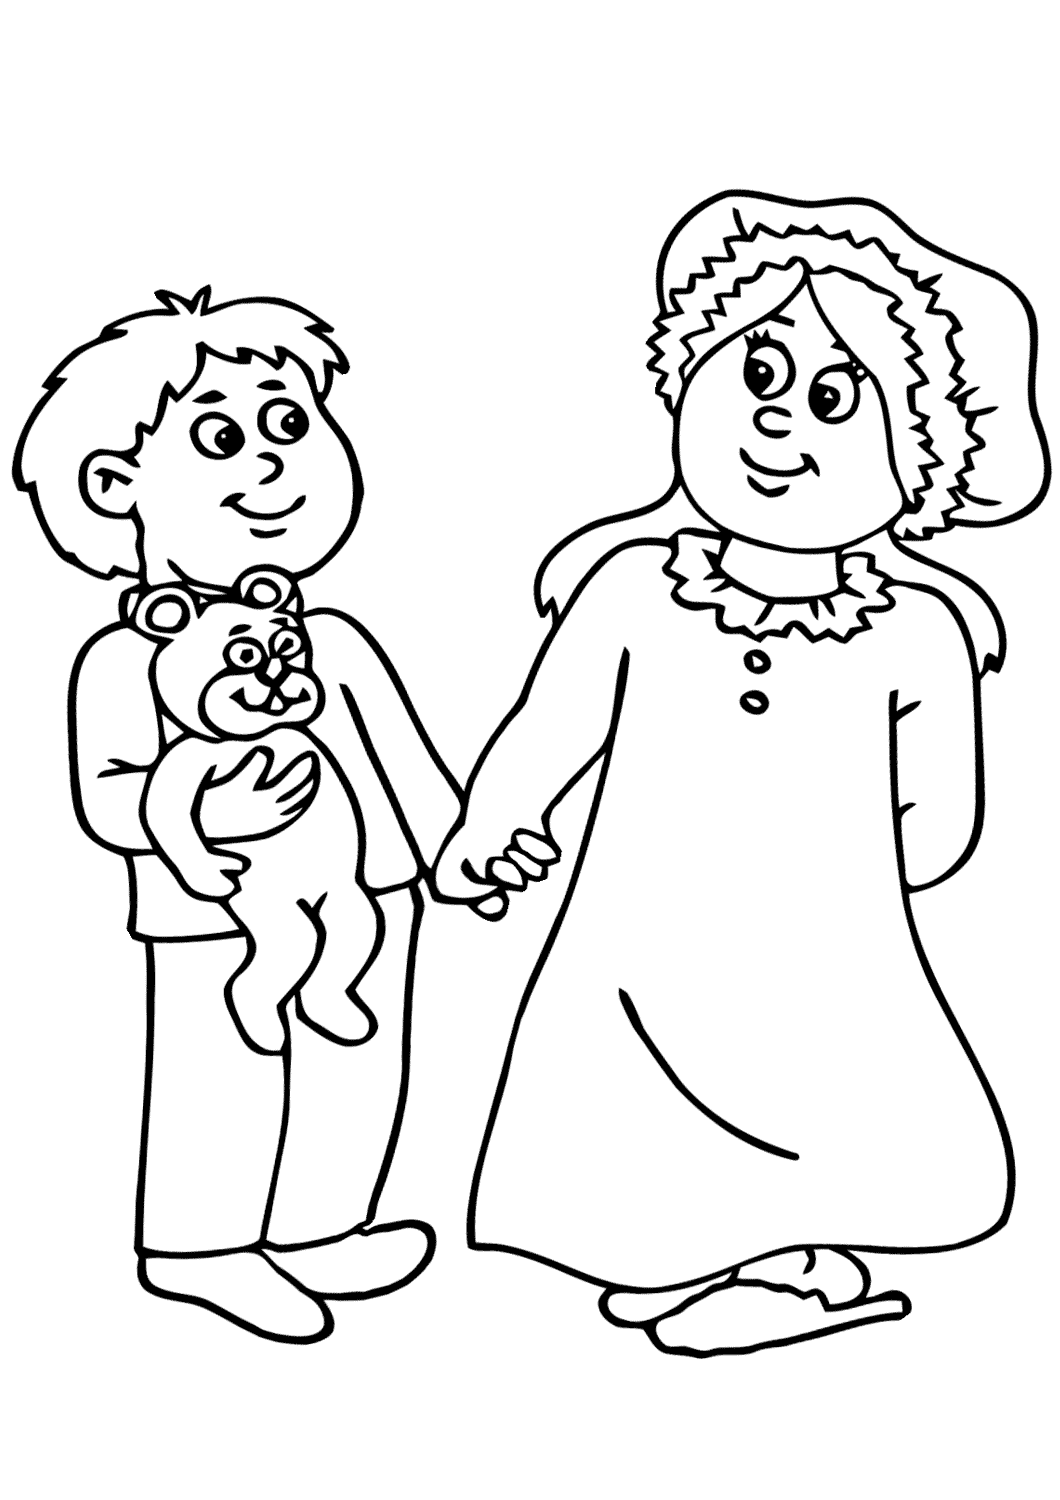 showing kindness coloring pages